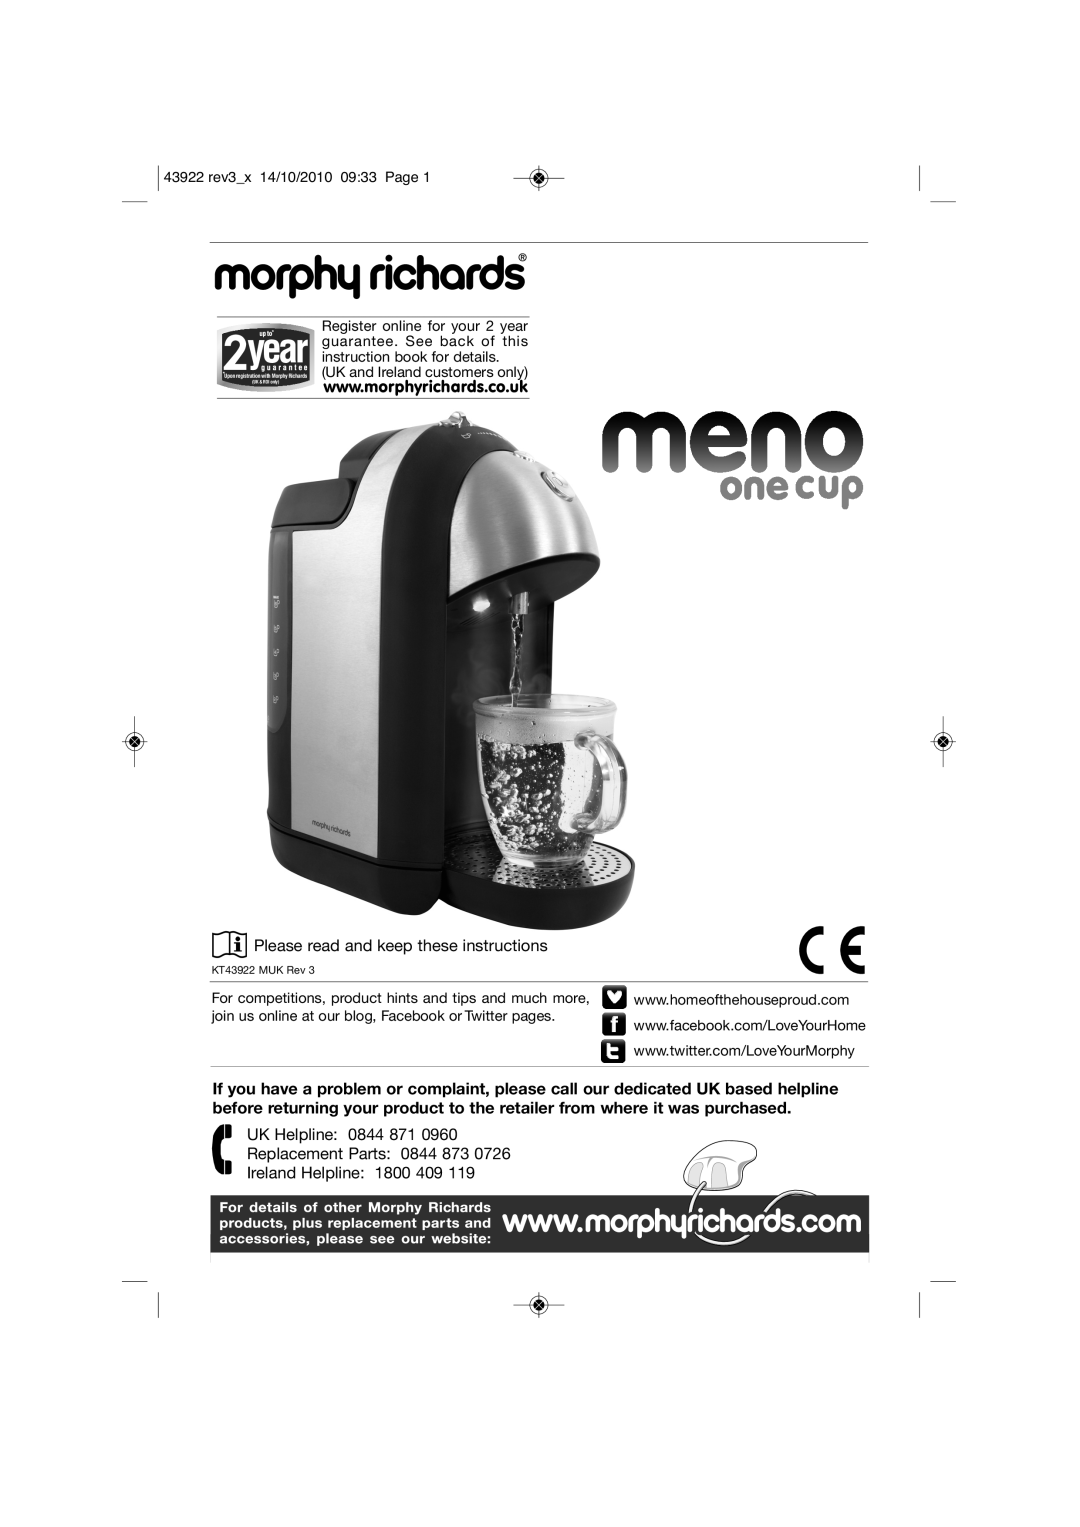 Morphy Richards KT43922 manual Please read and keep these instructions, UK Helpline 0844 871 Replacement Parts 0844 